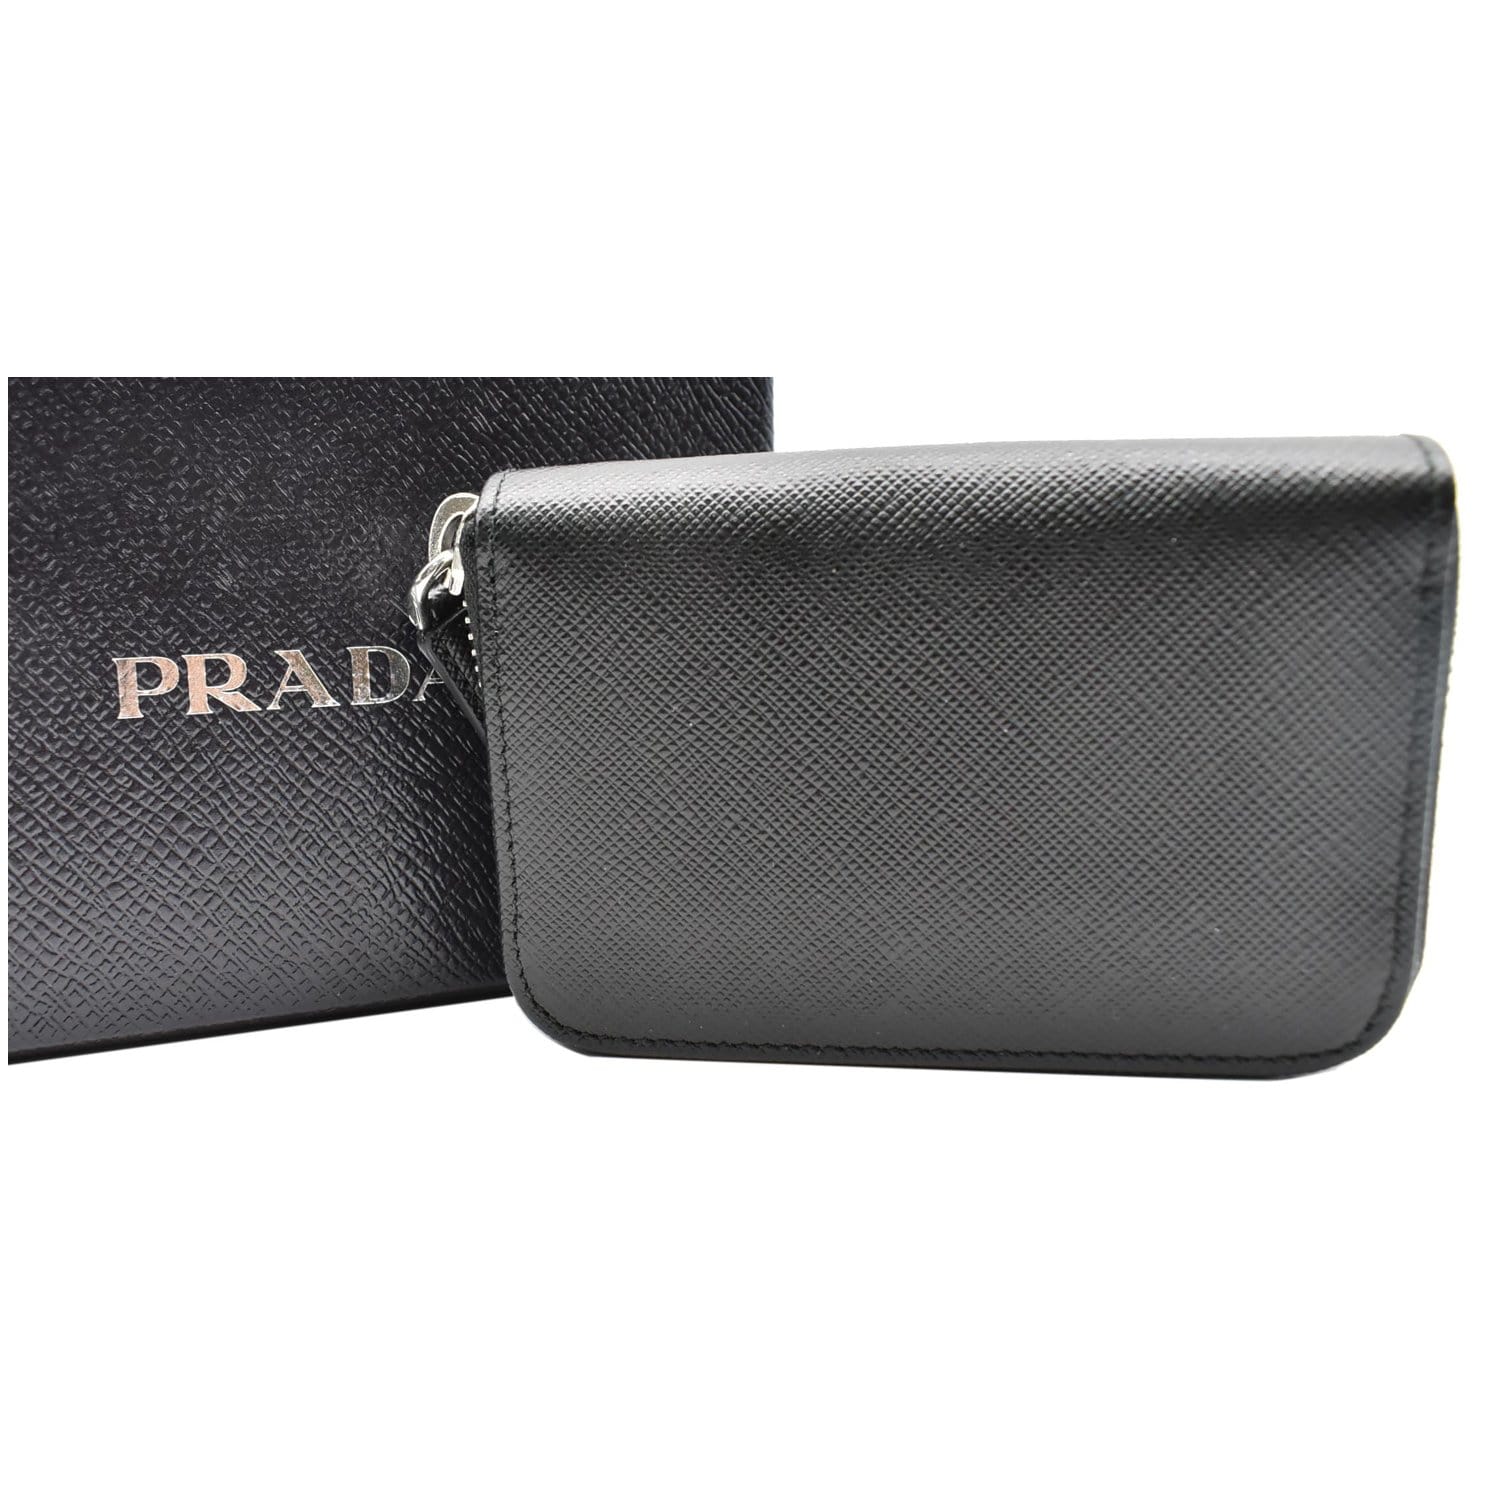 Prada Credit Card Holder/Wallet, Black Leather, Authentic, Chic Gift, SALE